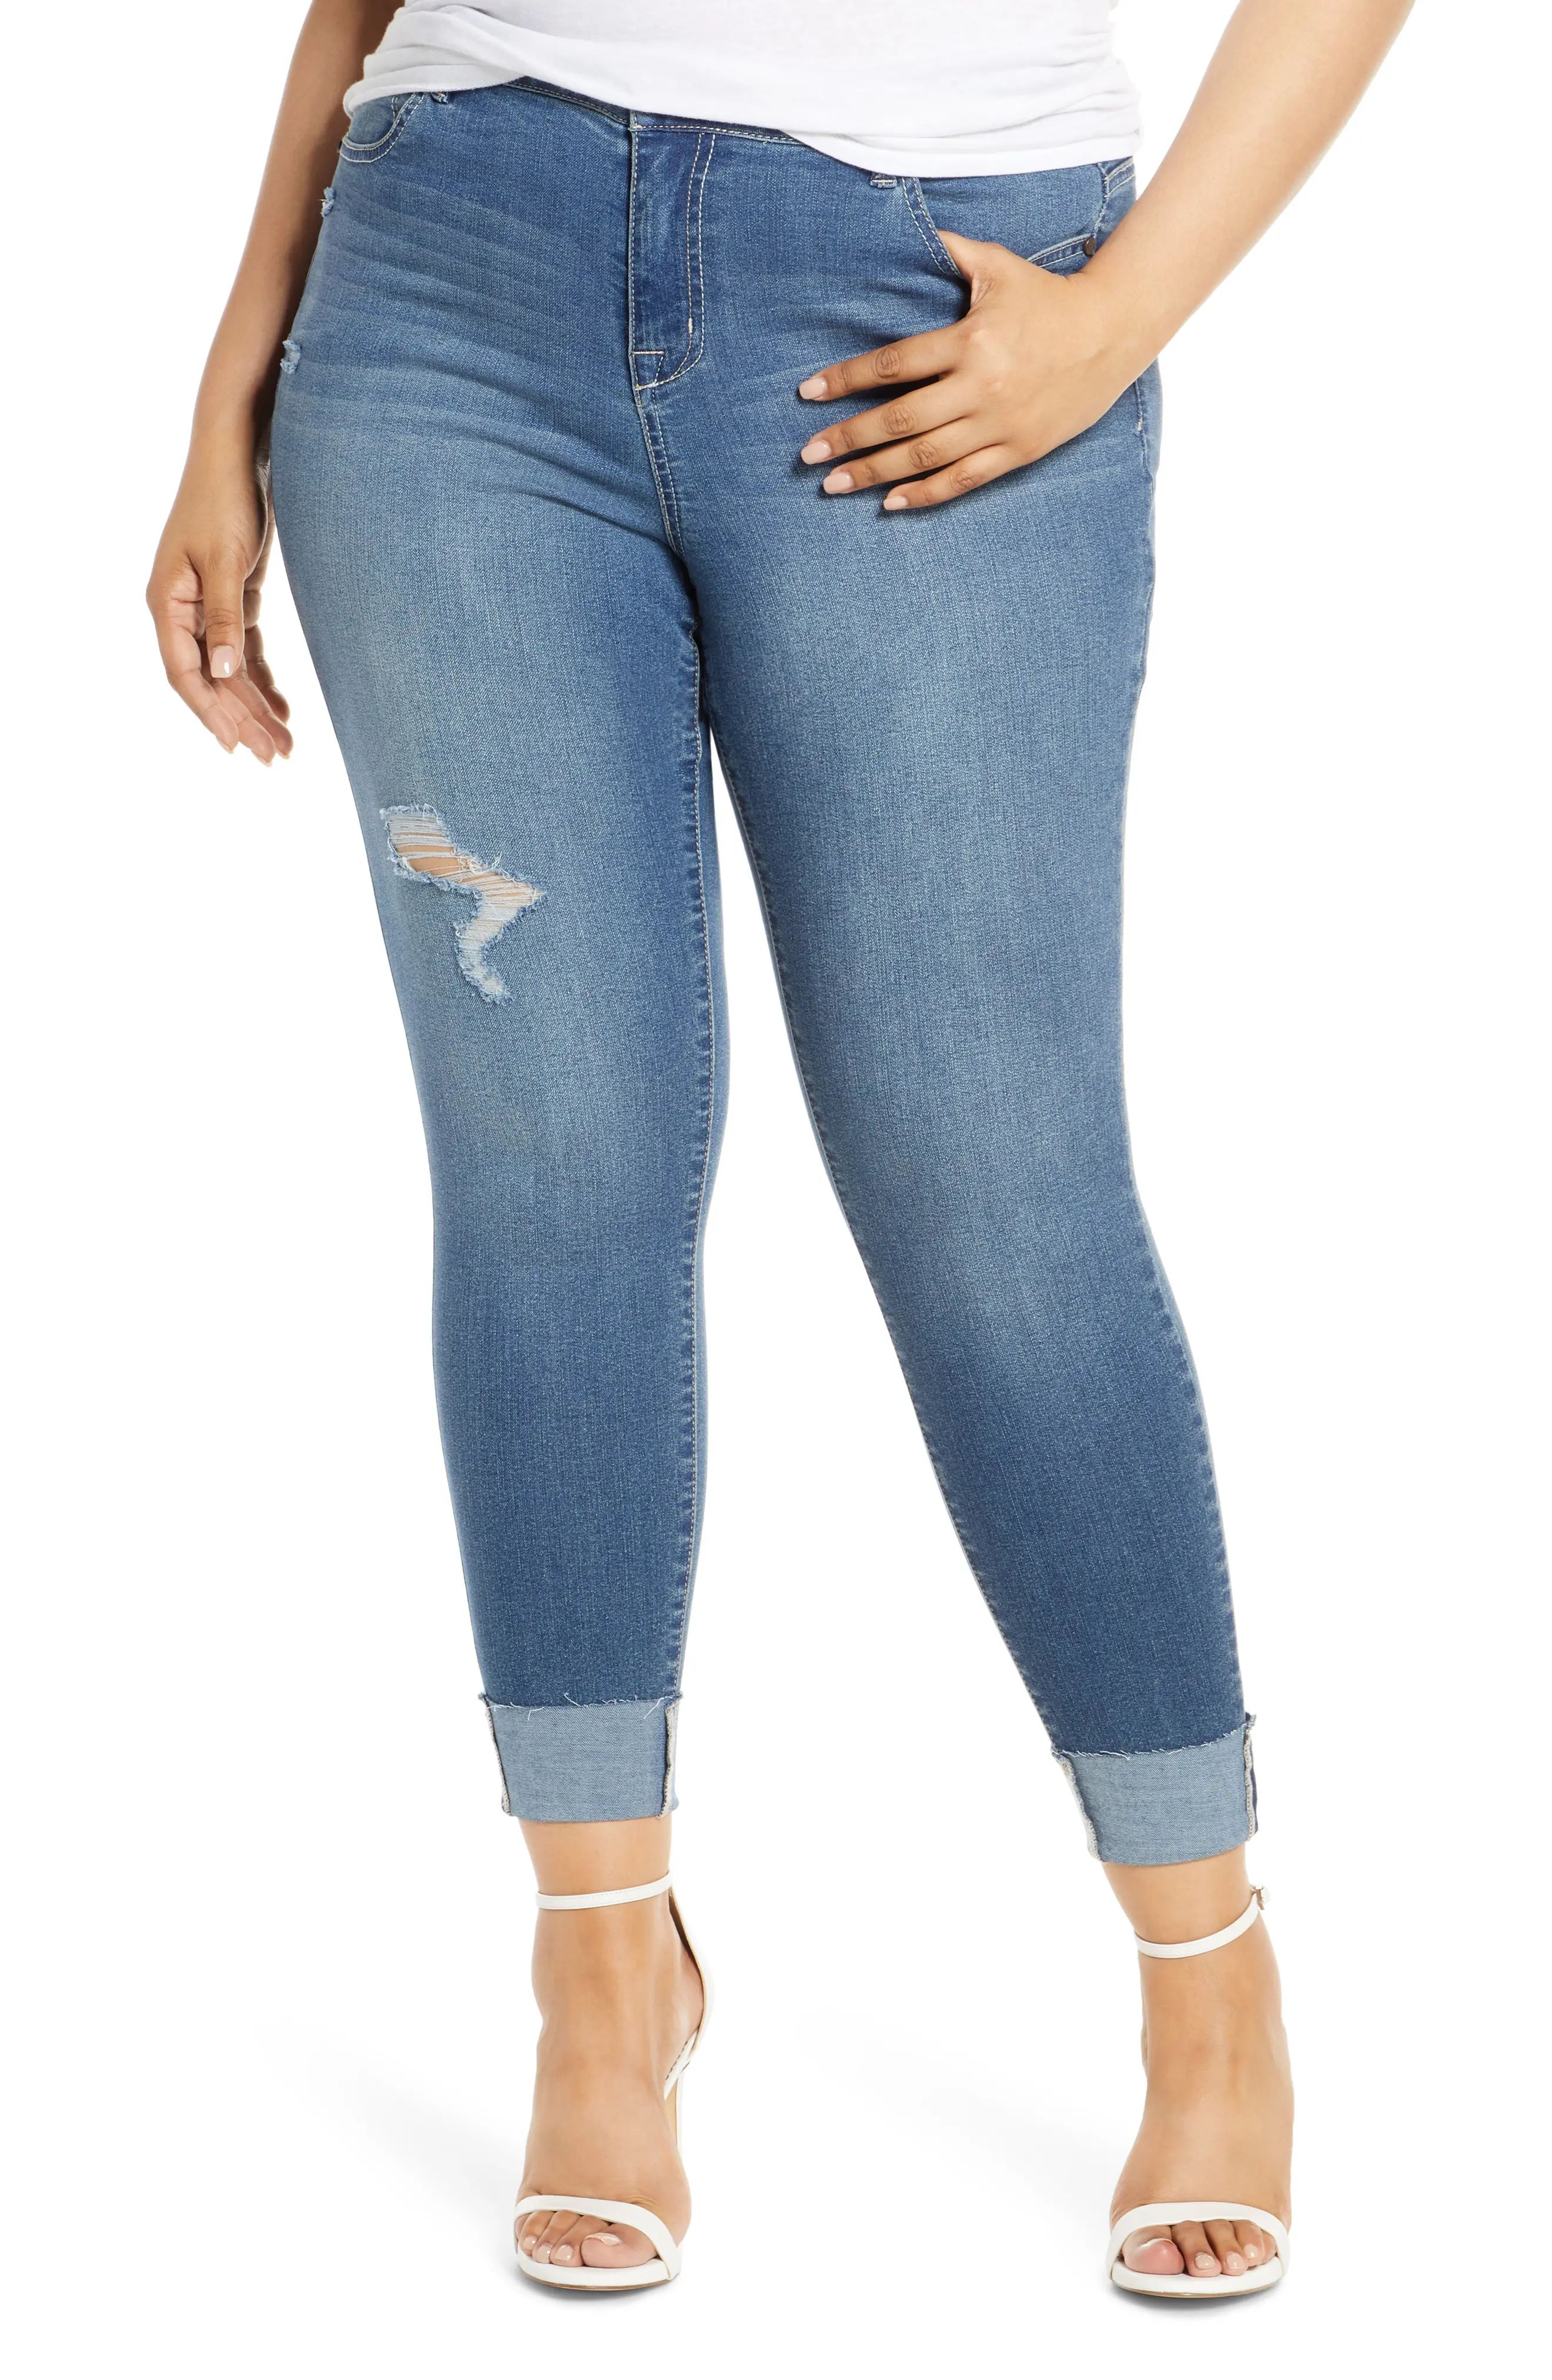 Plus Size Women's 1822 Denim Distressed Roll Ankle Jeggings, Size 18W - Blue | Nordstrom